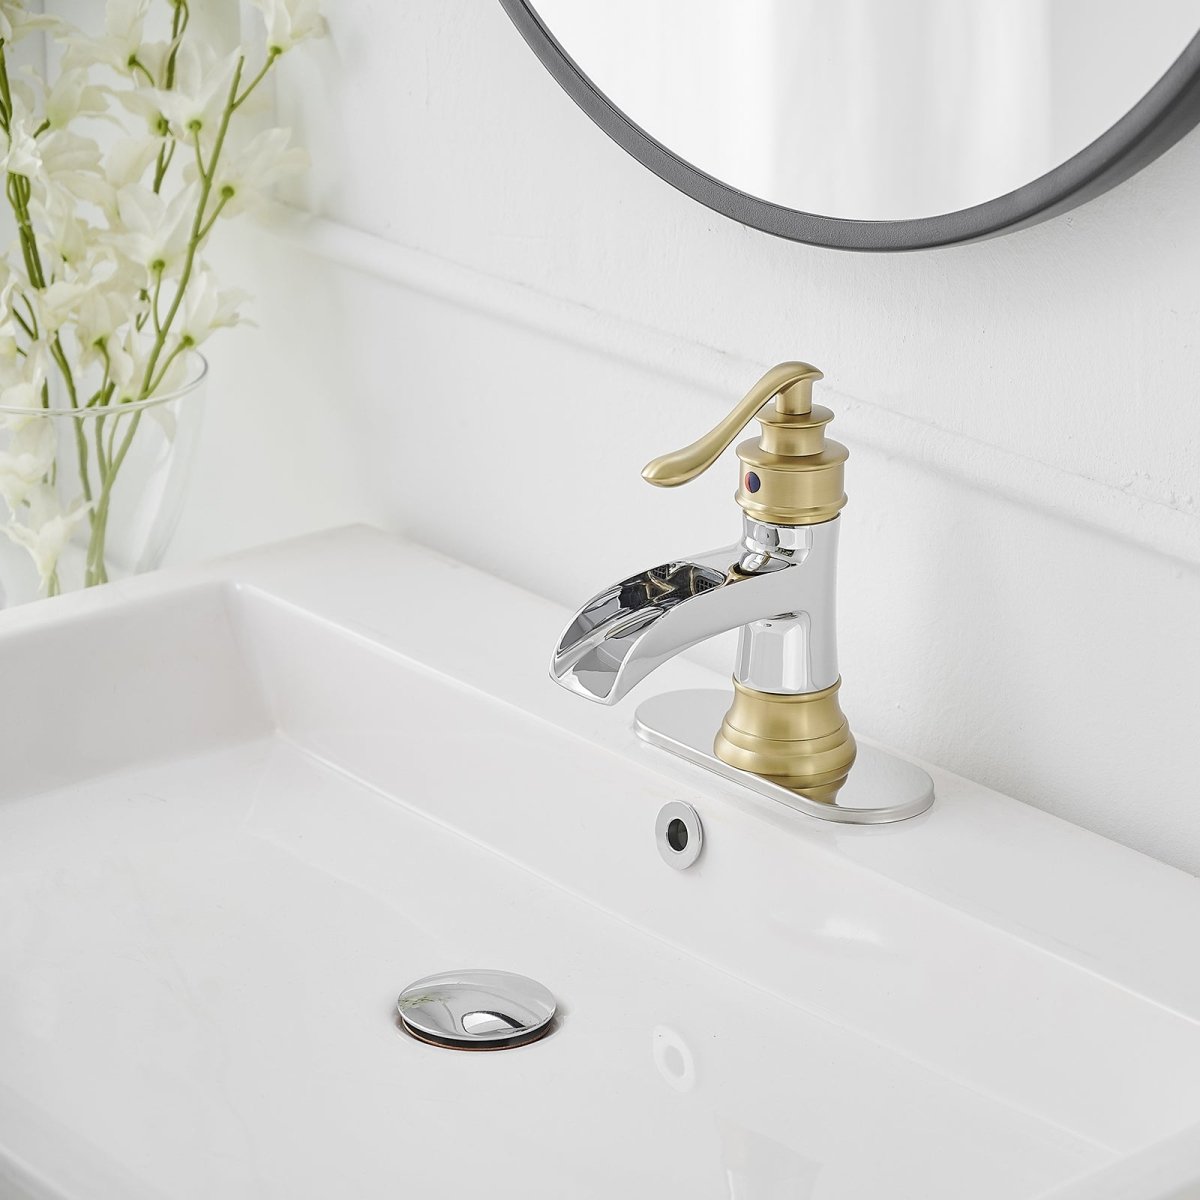 Waterfall Single Hole Low-Arc Bathroom Faucet in Chrome & Gold - buyfaucet.com